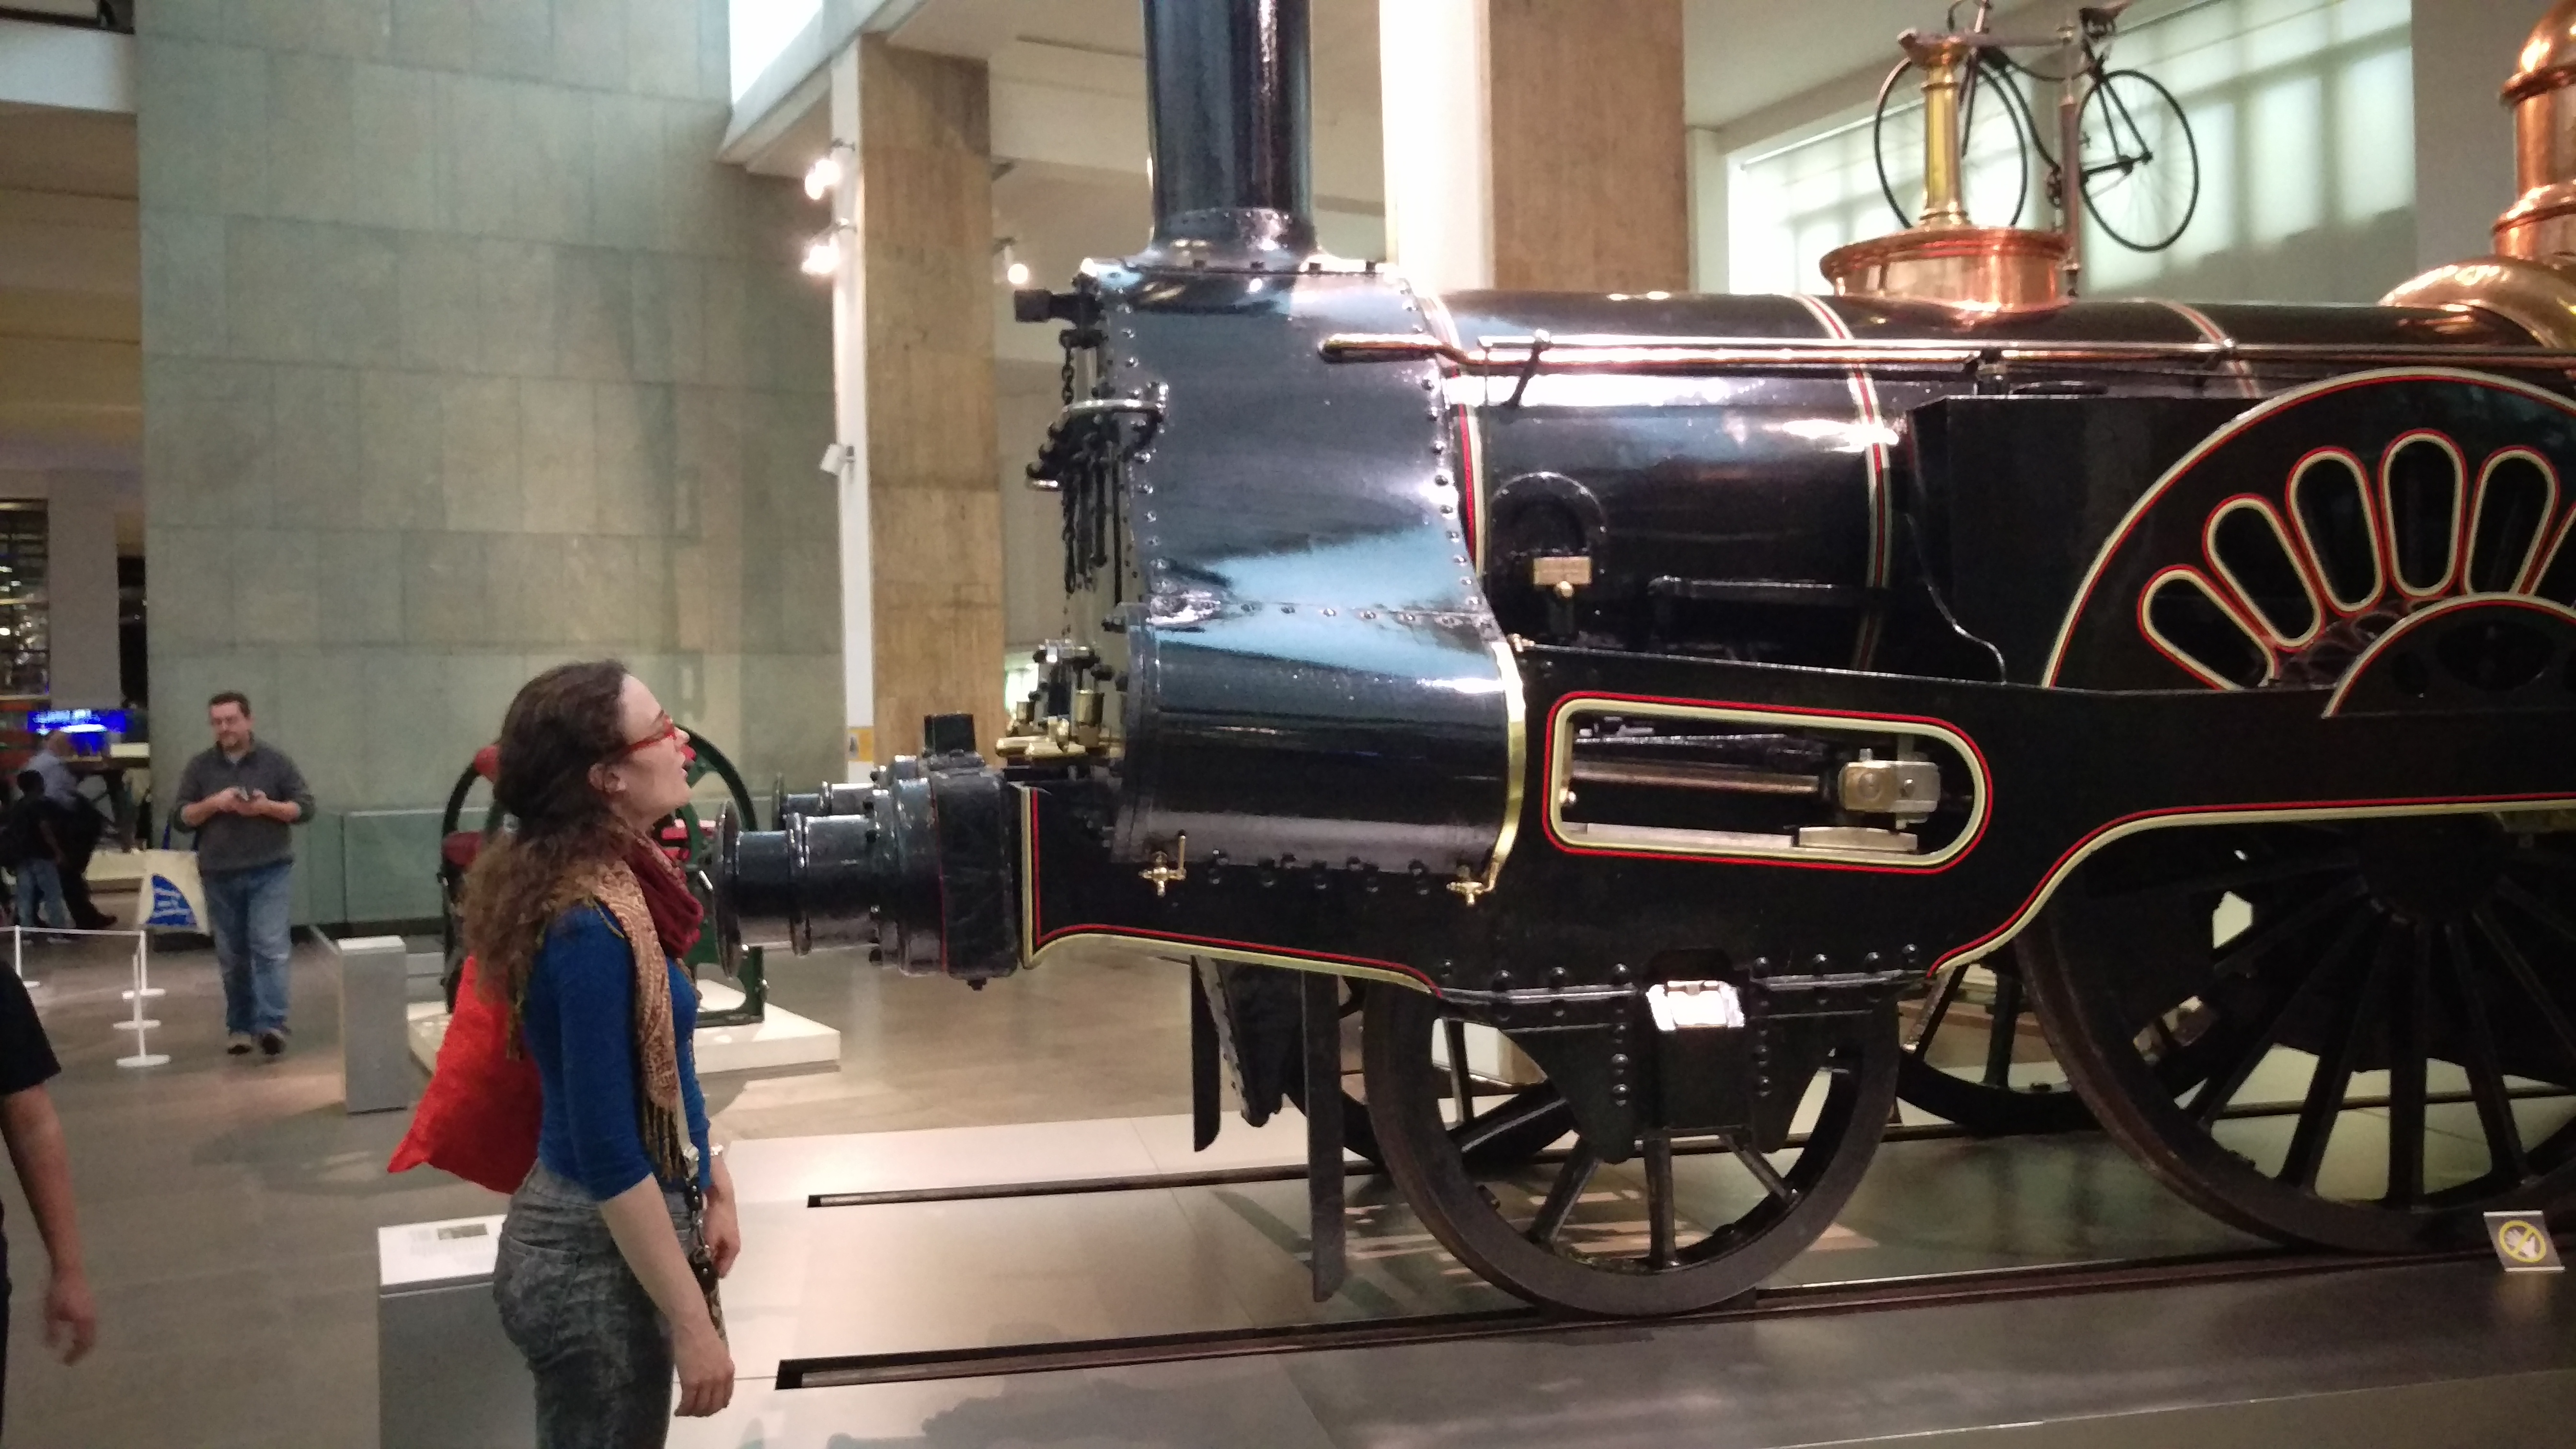 A photo of me, starting with mouth agape at a train from the industrial revolution era in the London Science museum